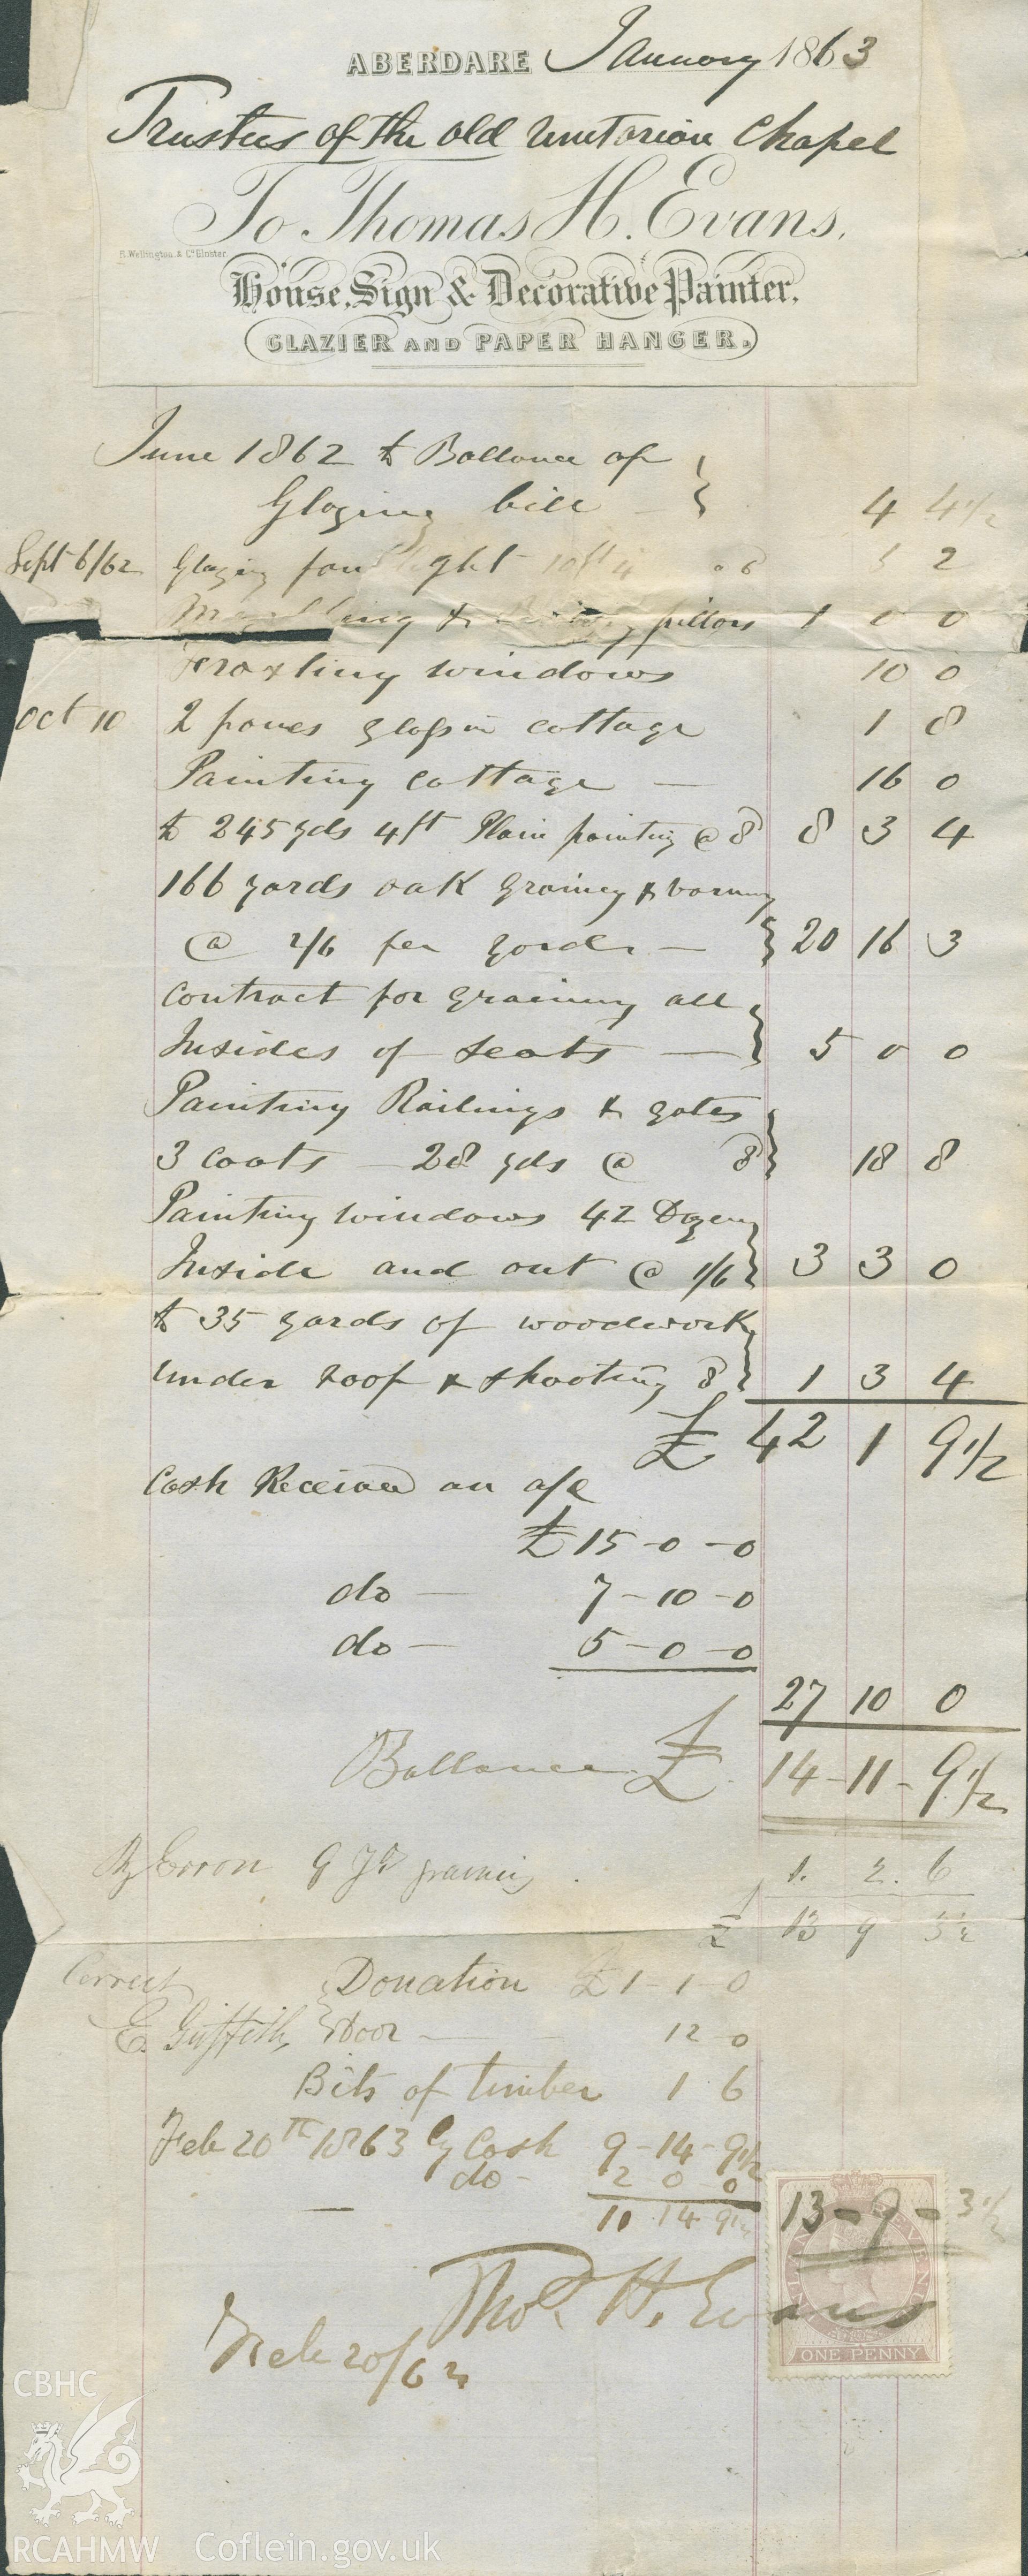 Handwritten list of Trustees of yr Hen Dy Cwrdd, Aberdare, January 1863. Donated by the Rev. Eric Jones to the RCAHMW as part of the Digital Dissent Project.